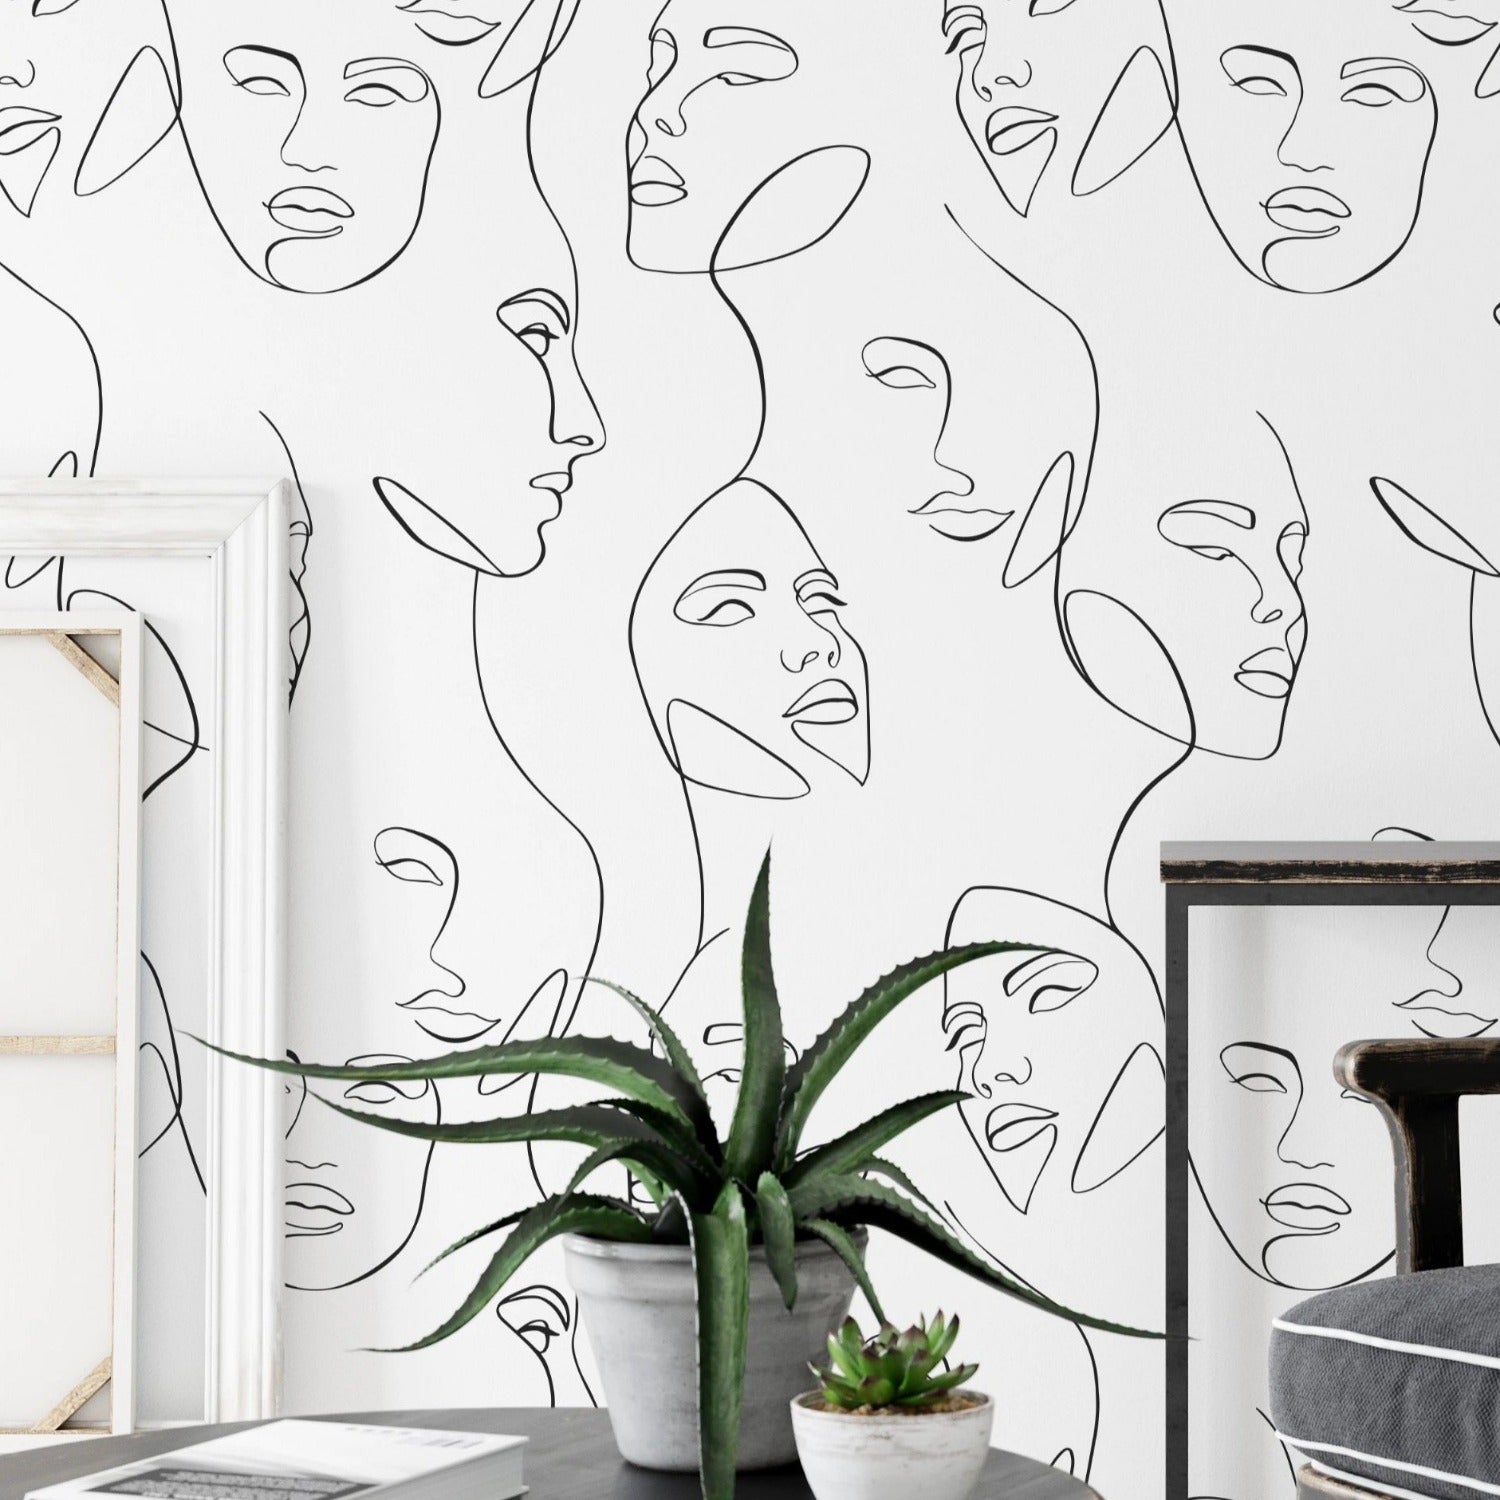 A contemporary room with a wall adorned by the Abstract and Minimal Wallpaper - Line Art III, which displays an array of interconnected black line art faces, offering a bold yet simplistic design element to the space